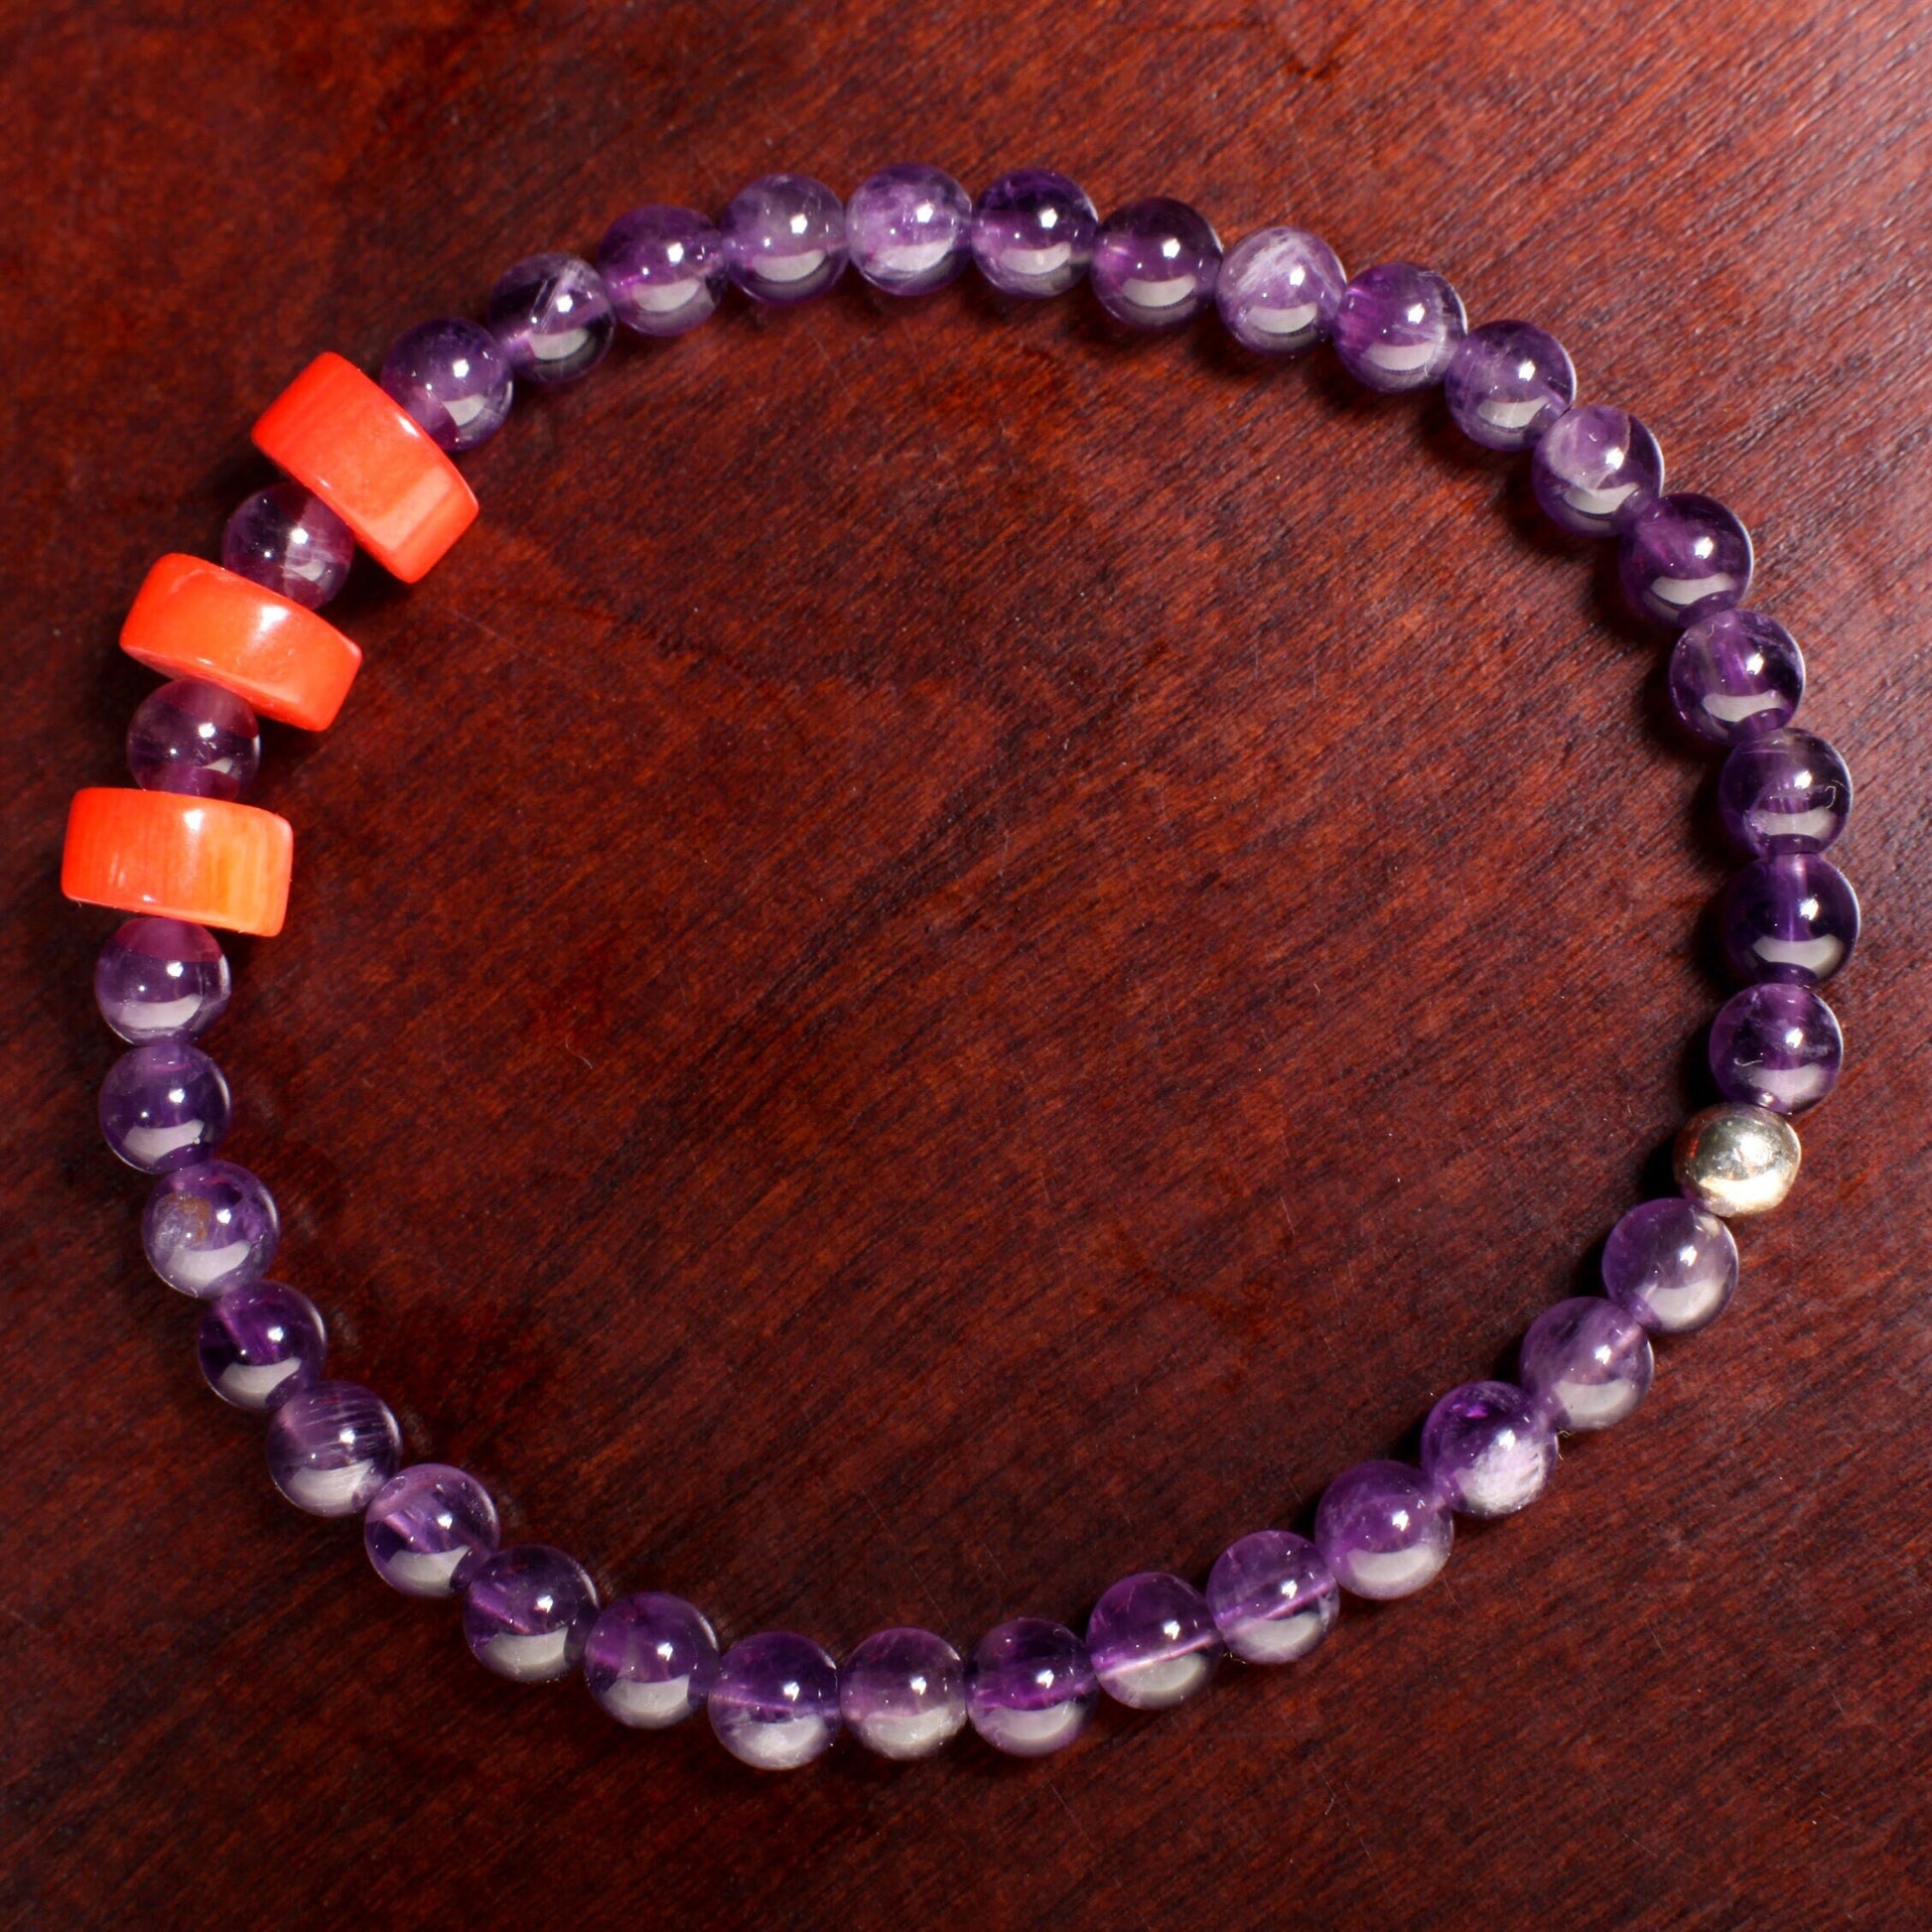 Natural Amethyst Round 4mm with Coral Heishe 8mm Gemstone Bracelet, healing Crystal yoga Energy Stretchy Soothing Bracelet Gift